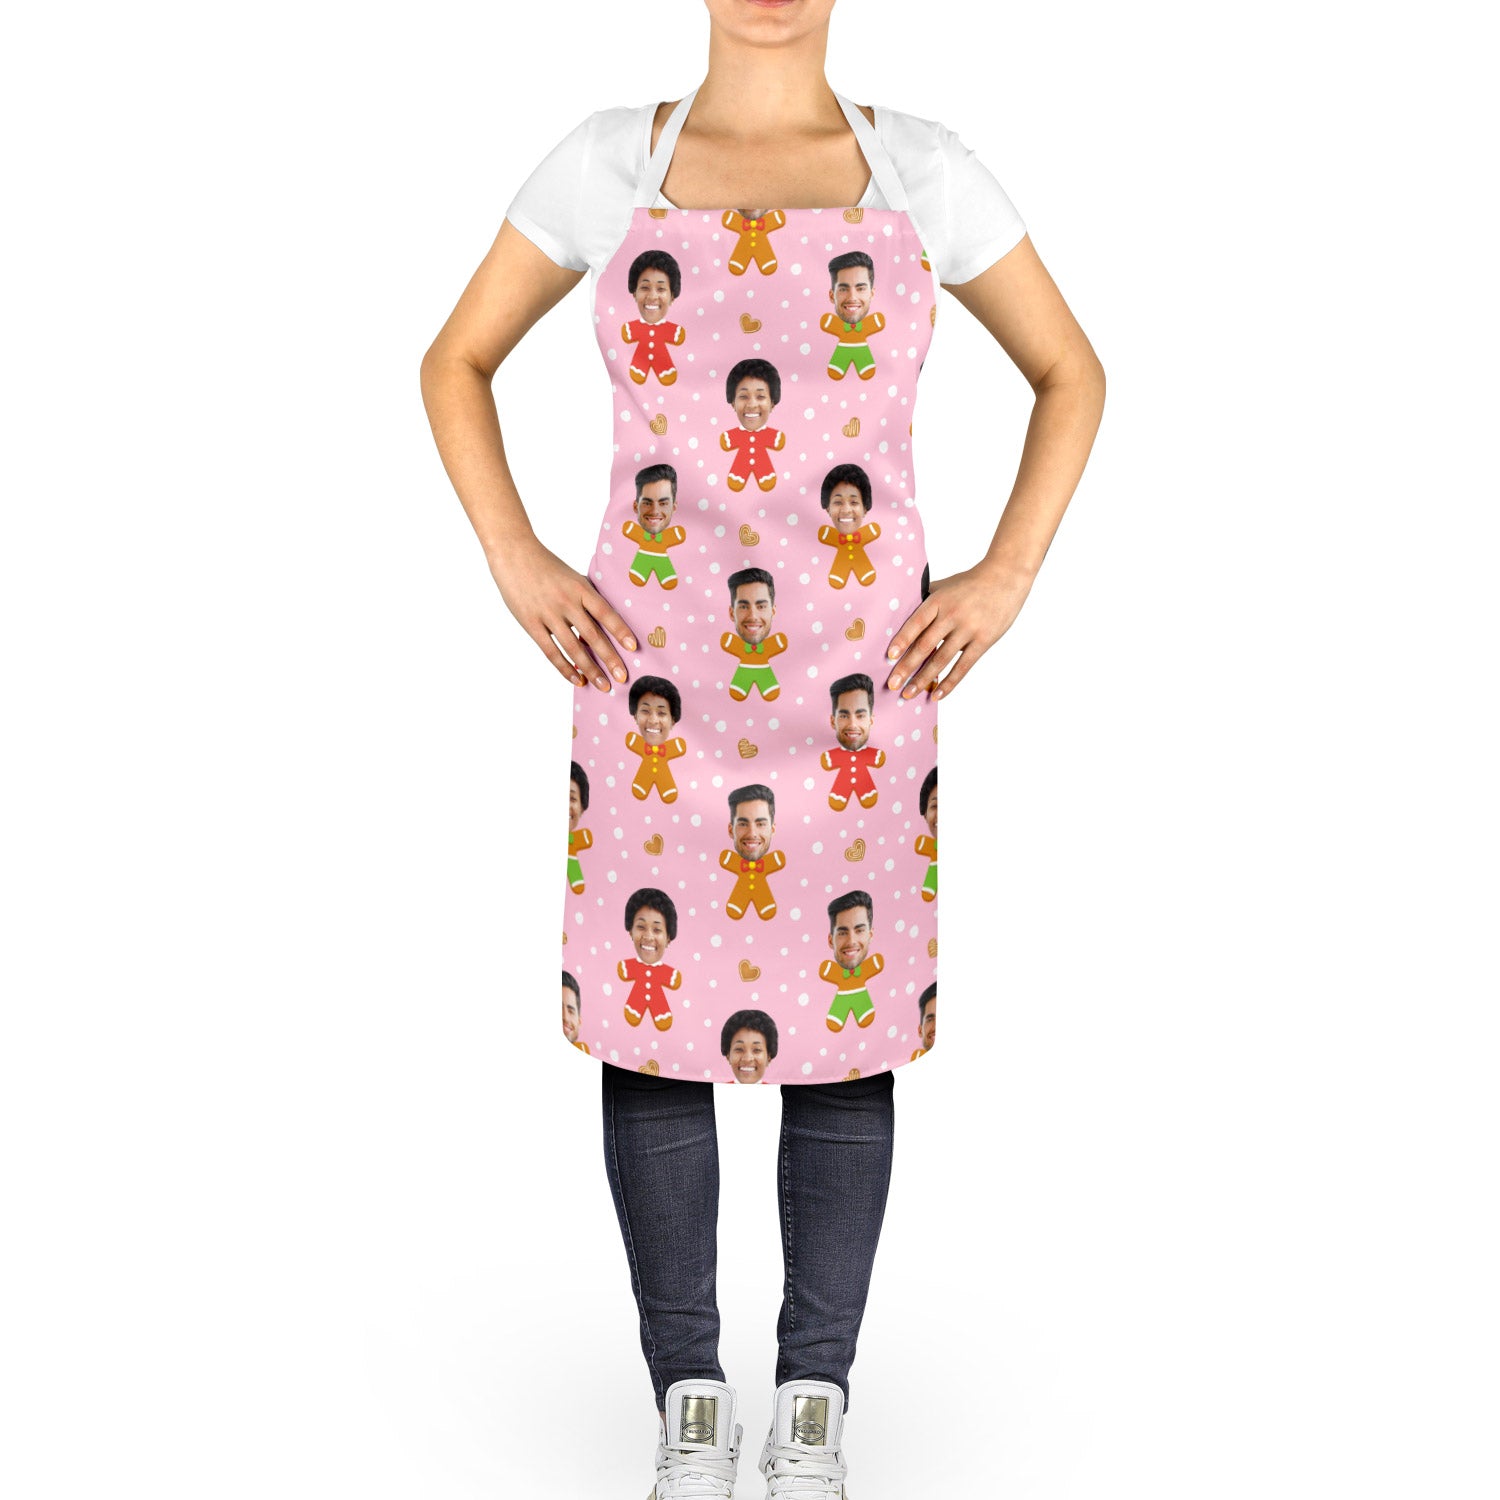 Gingerbread Me Personalised Apron